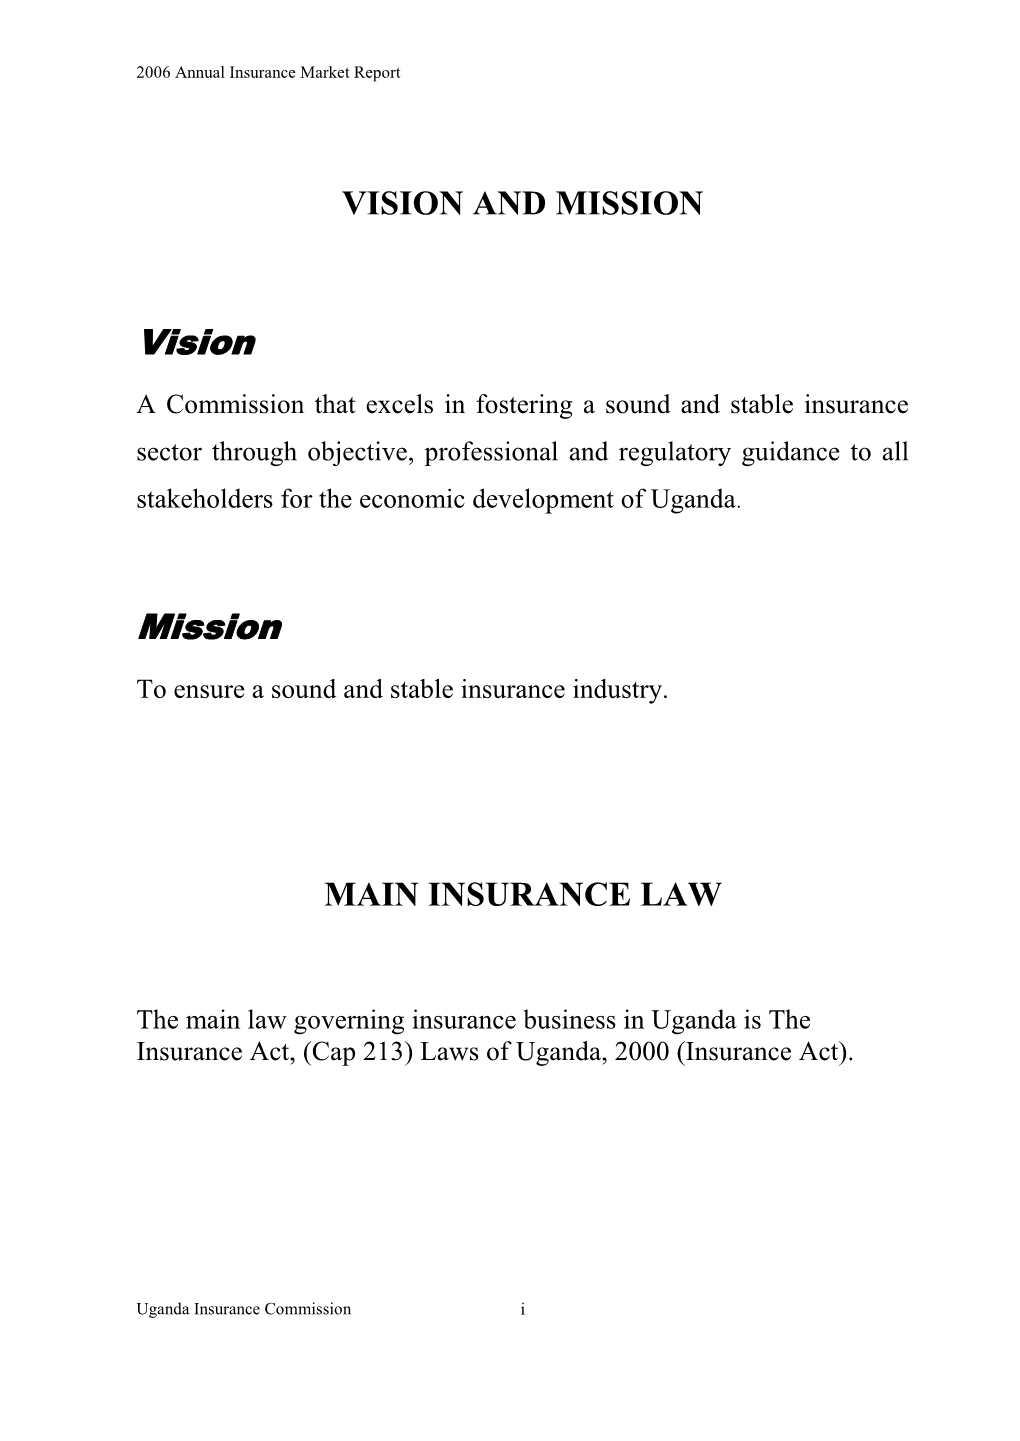 Insurance Market Report for the Year 2006 Annual Report 2006